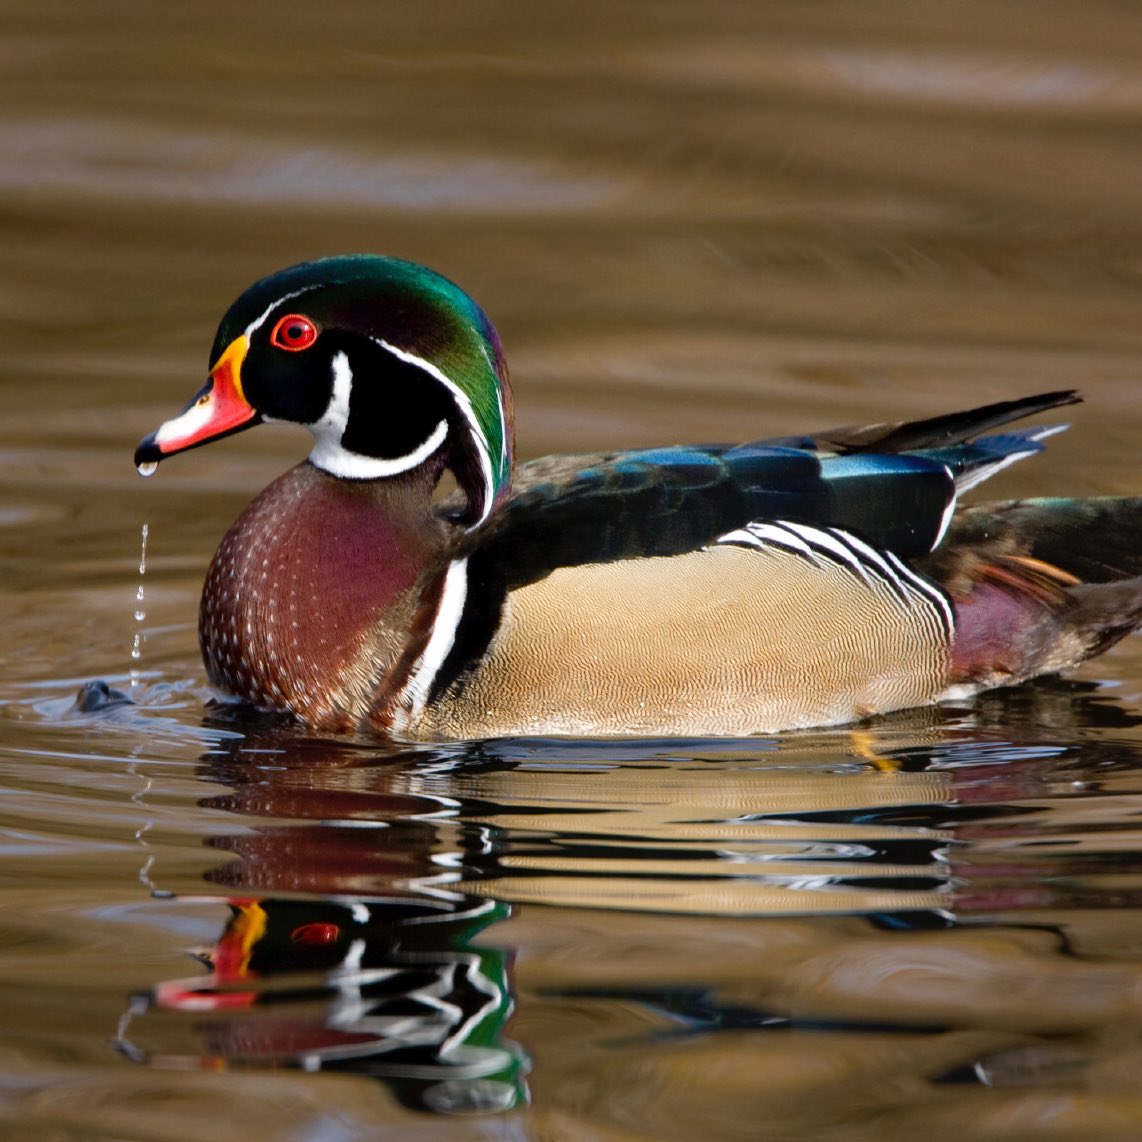 jaehyun ♦︎ wood duck- handsome. gorgeous. weird as FUCK. this bird doesnt make sense to me n neither does jaehyun- when theyre babies they just fling themselves bodily into the air from like 40ft up idk this maybe isnt relevant i just think its wild 